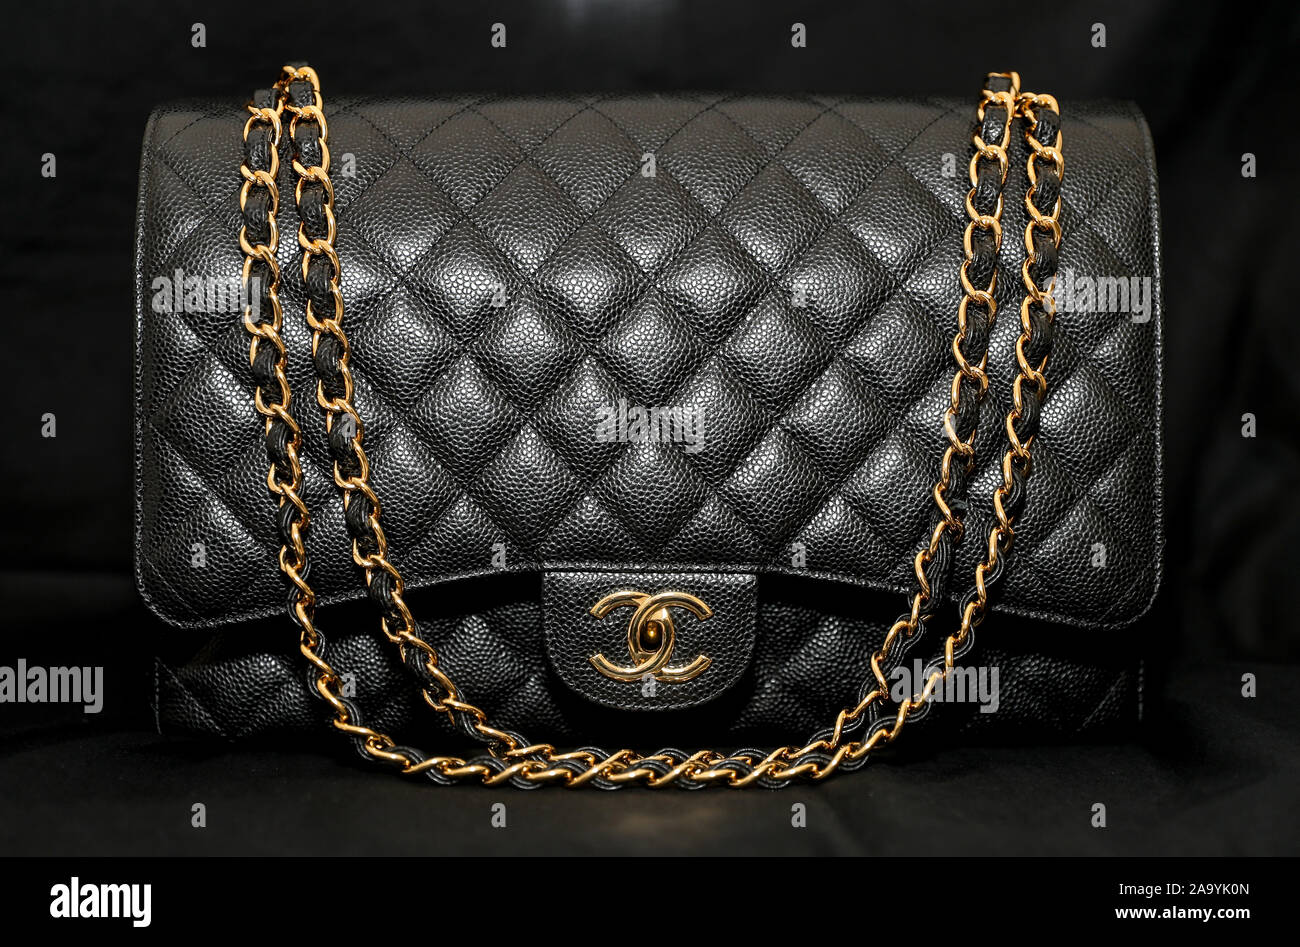 Chanel store milan hi-res stock photography and images - Alamy